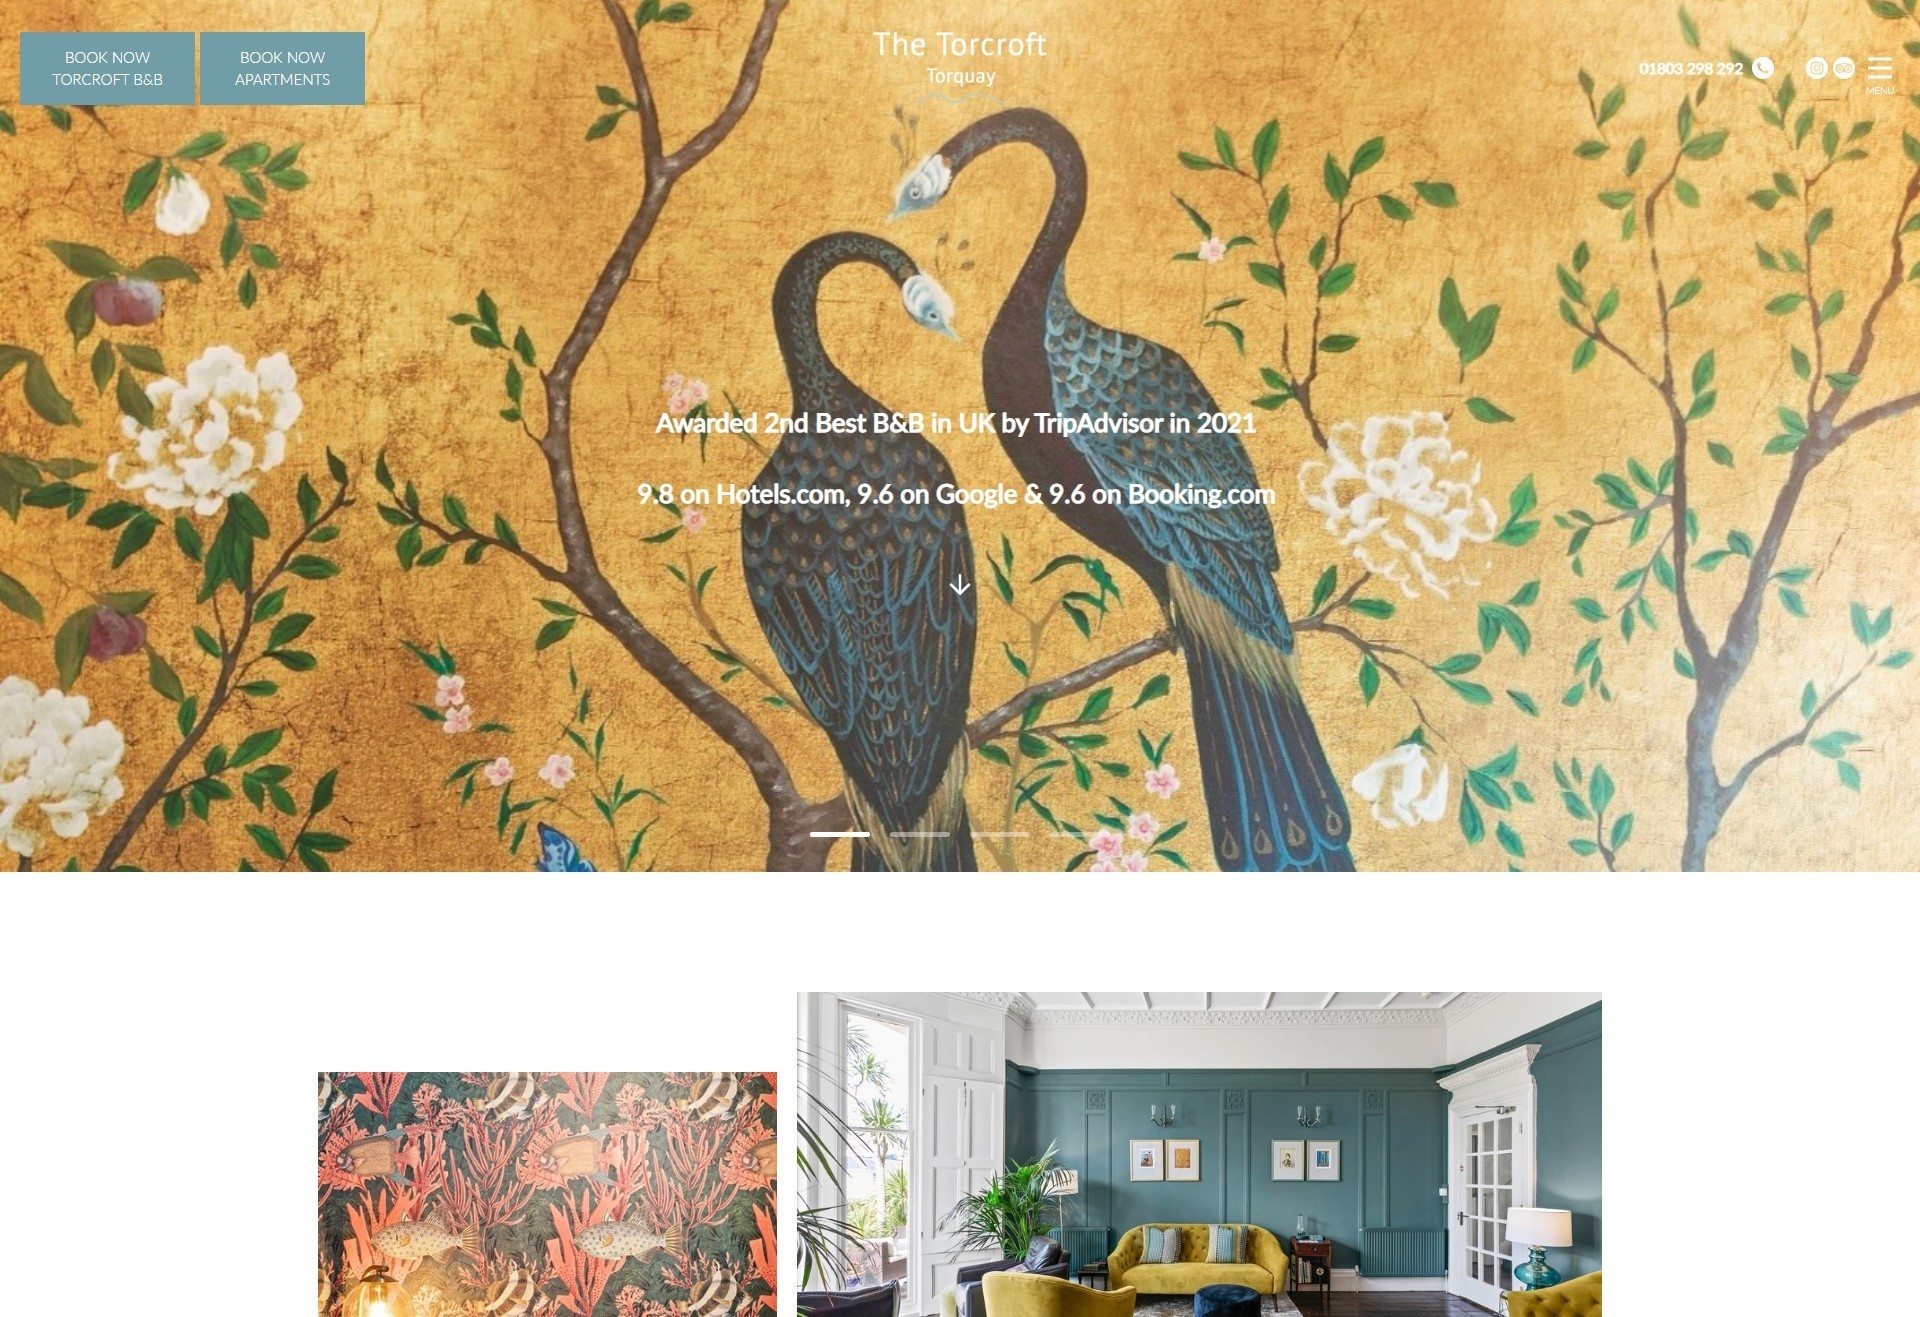 A responsive web design for a hotel and apartment company shown on desktop.